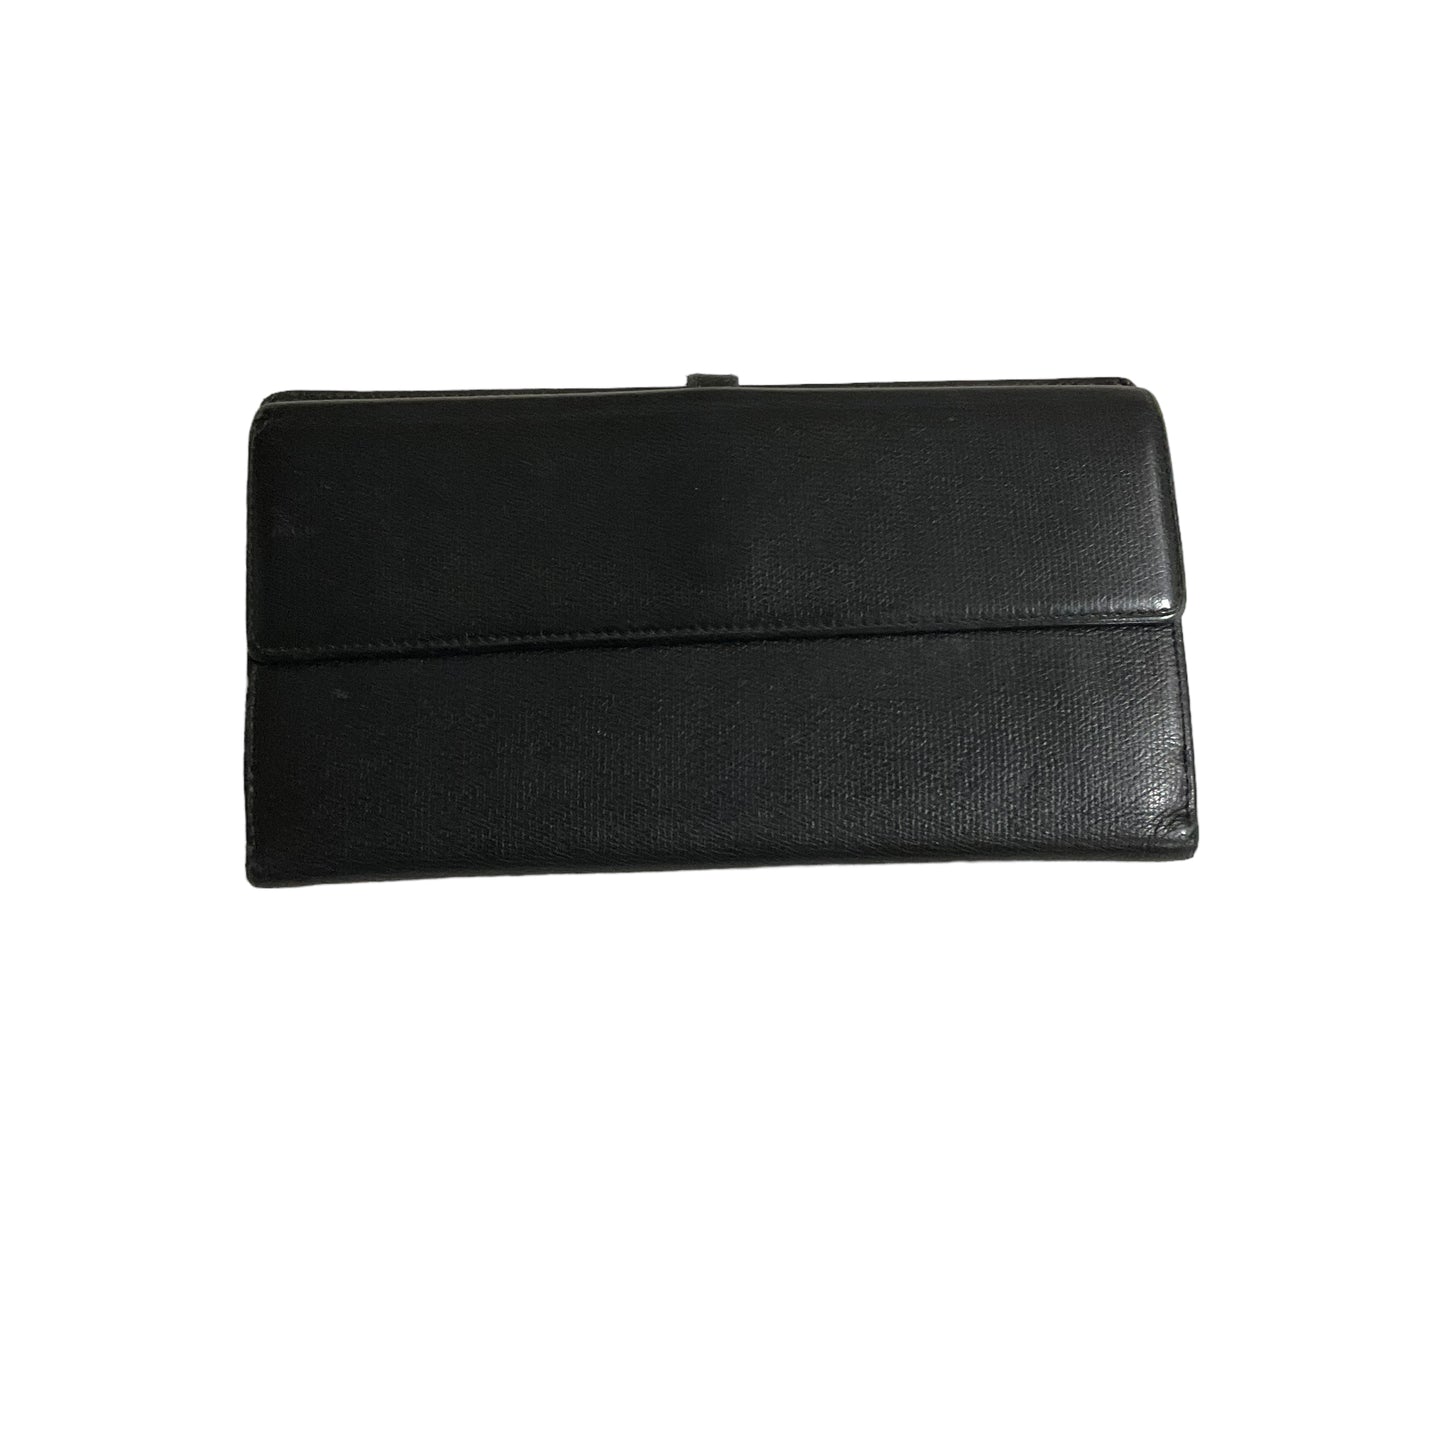 Wallet Luxury Designer By Chanel  Size: Large